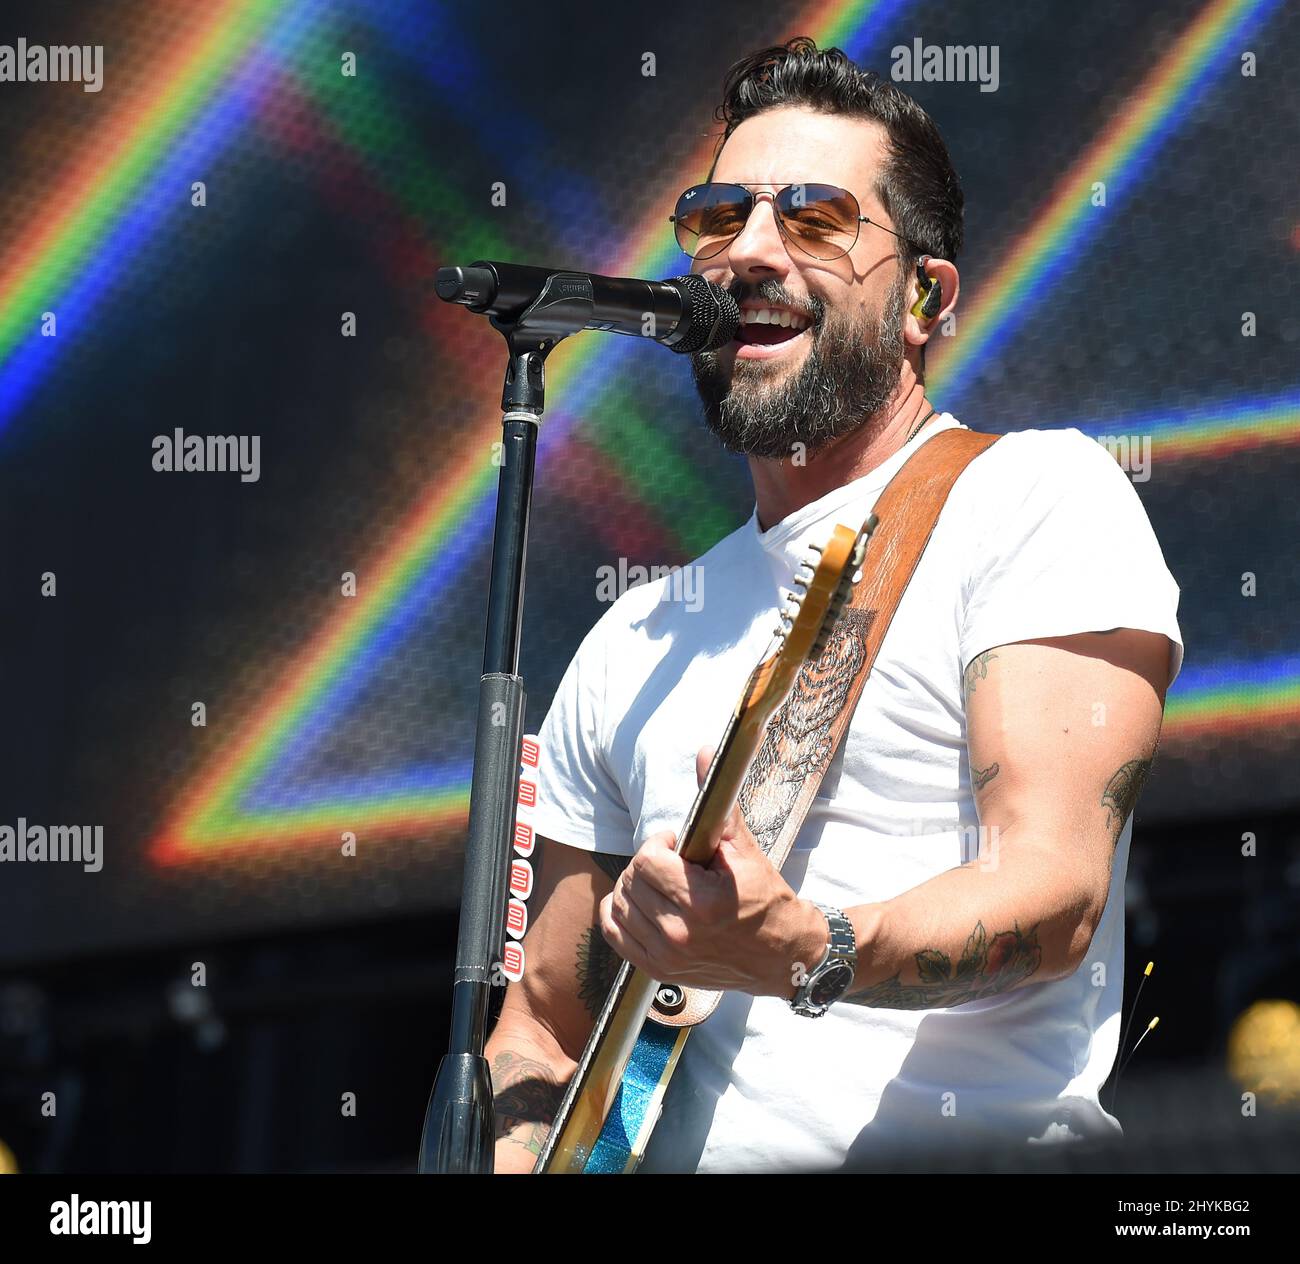 Matthew Ramsey from Old Dominion at the 2019 iHeartRadio Music Festival Daytime Stage held at the Las Vegas Festival Grounds on September 21, 2019 in Las Vegas, NV. Stock Photo